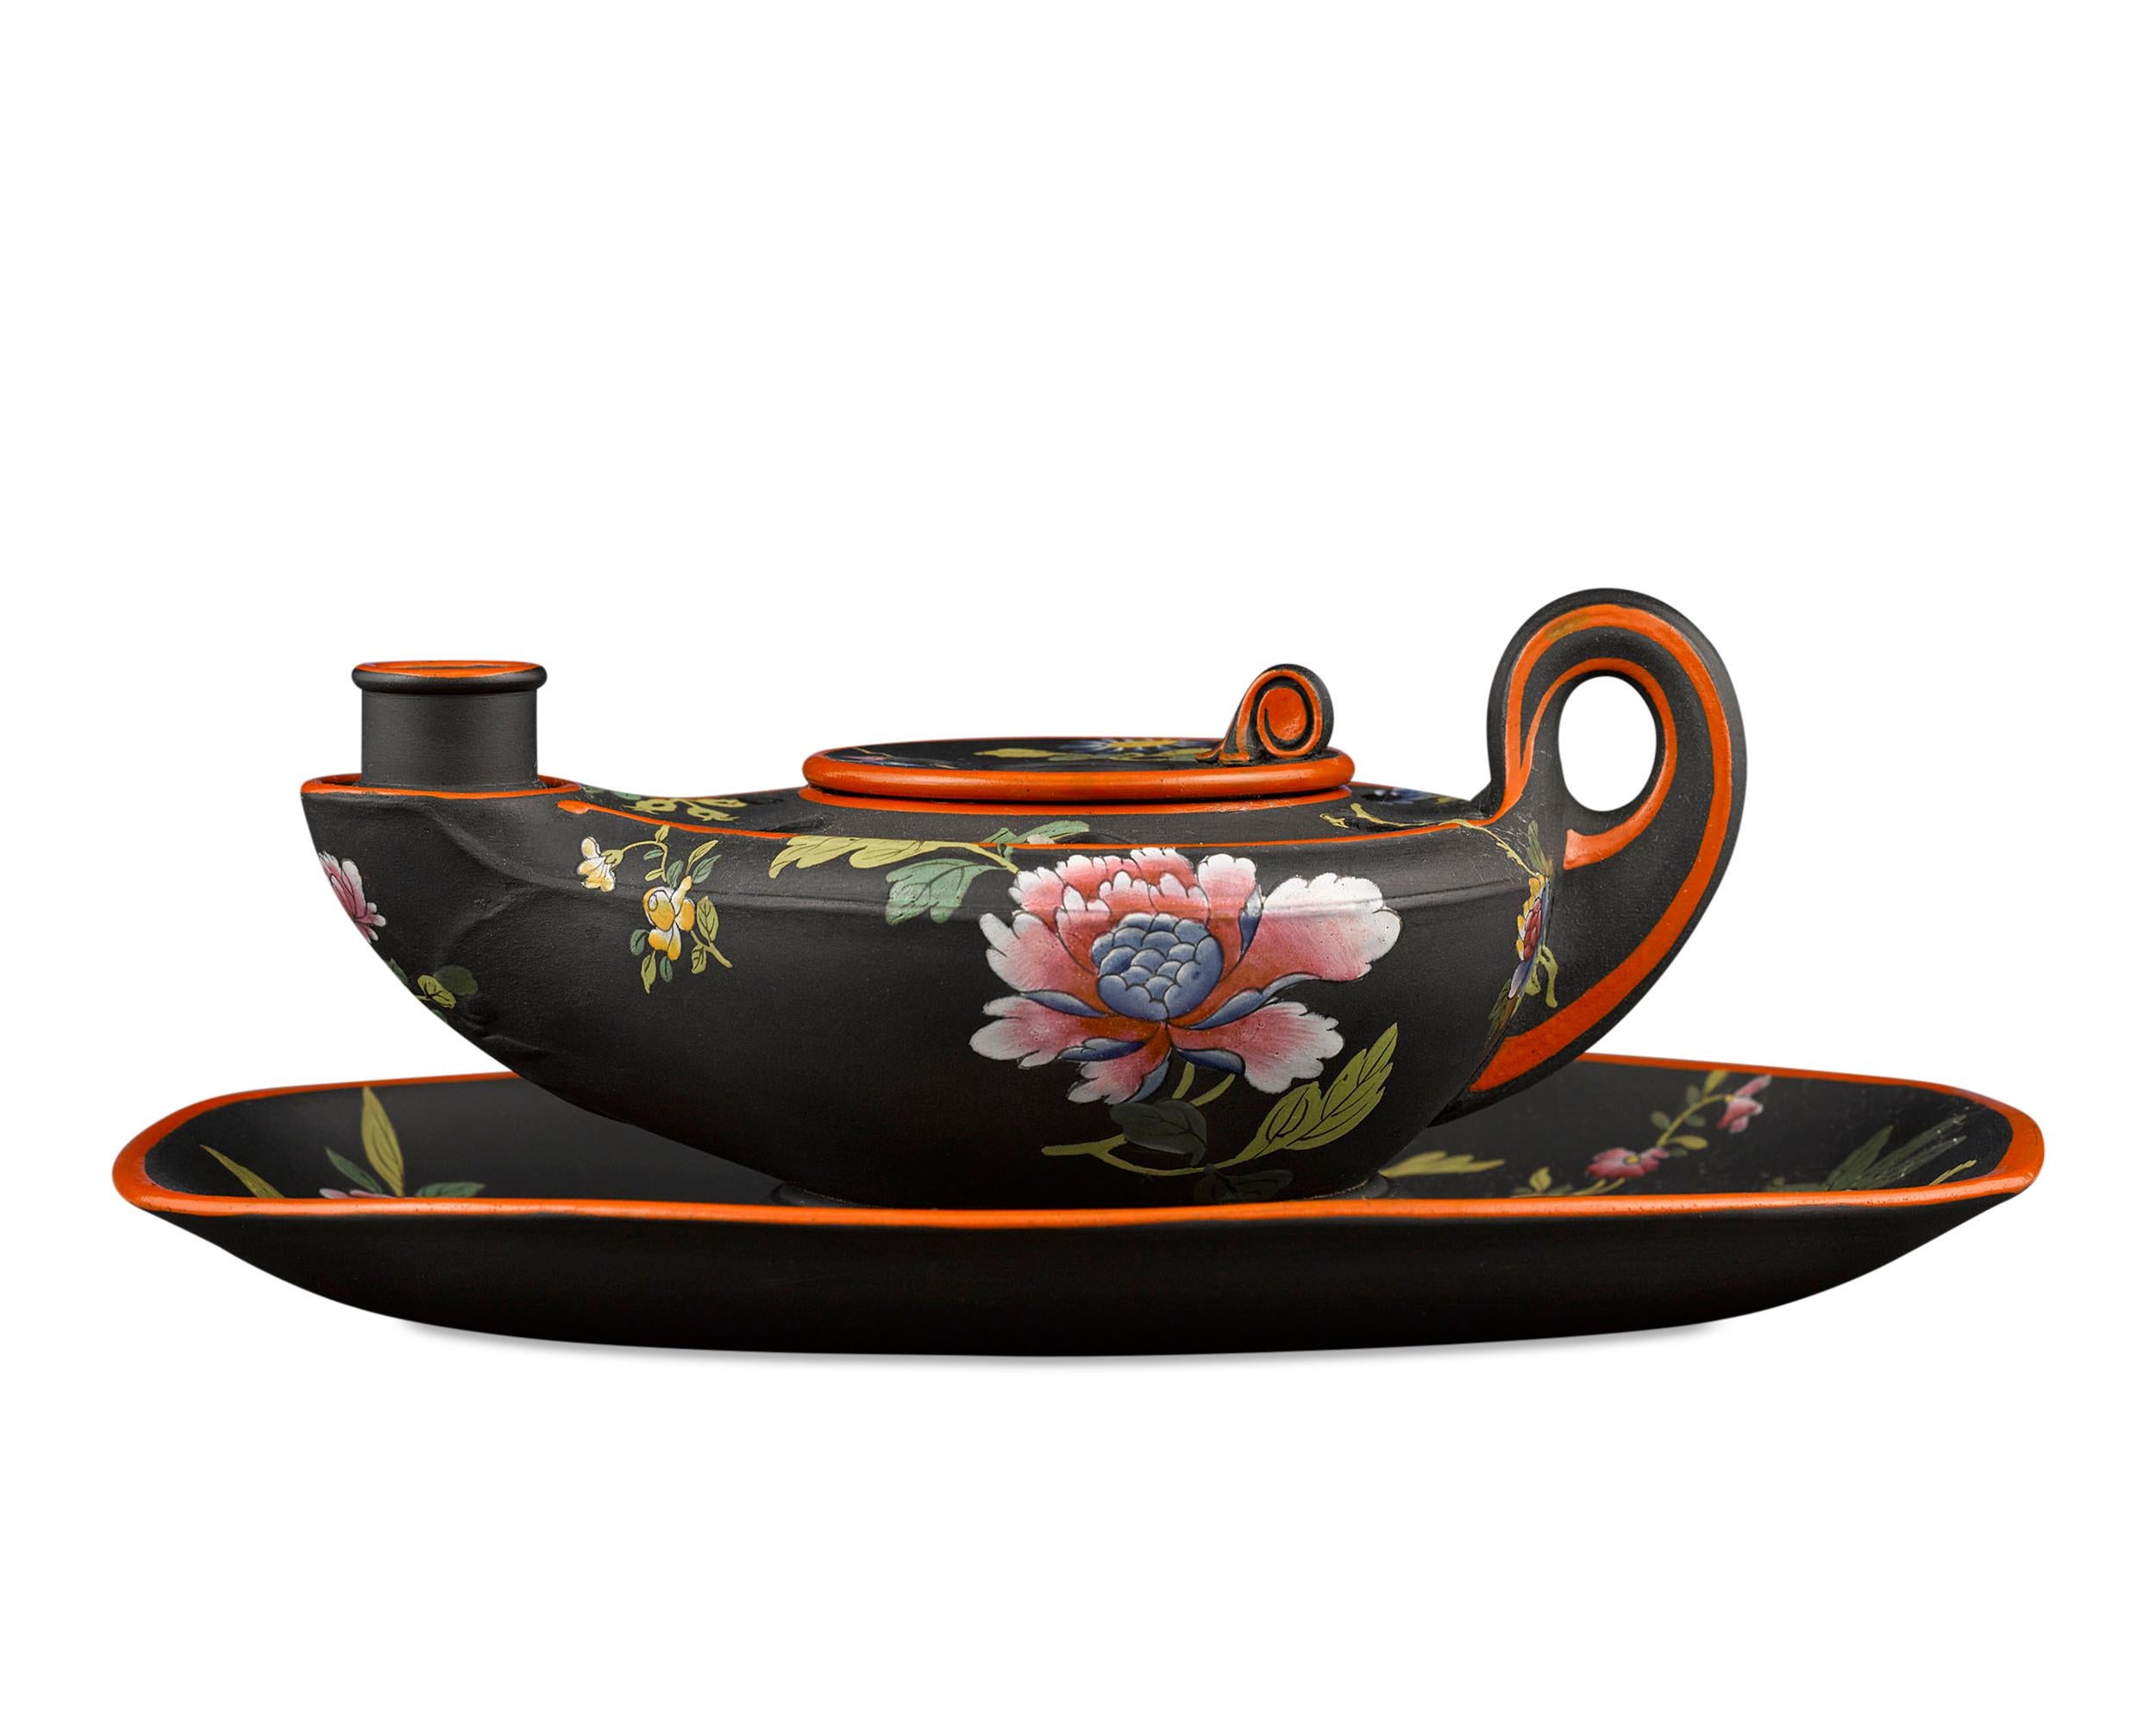 This enchanting antique Wedgwood black basalt inkwell is crafted in the form of an ancient oil lamp. With a removable well and holes for storing pens and quills, it is decorated with exquisitely hand painted enamel in a Chinese-inspired floral